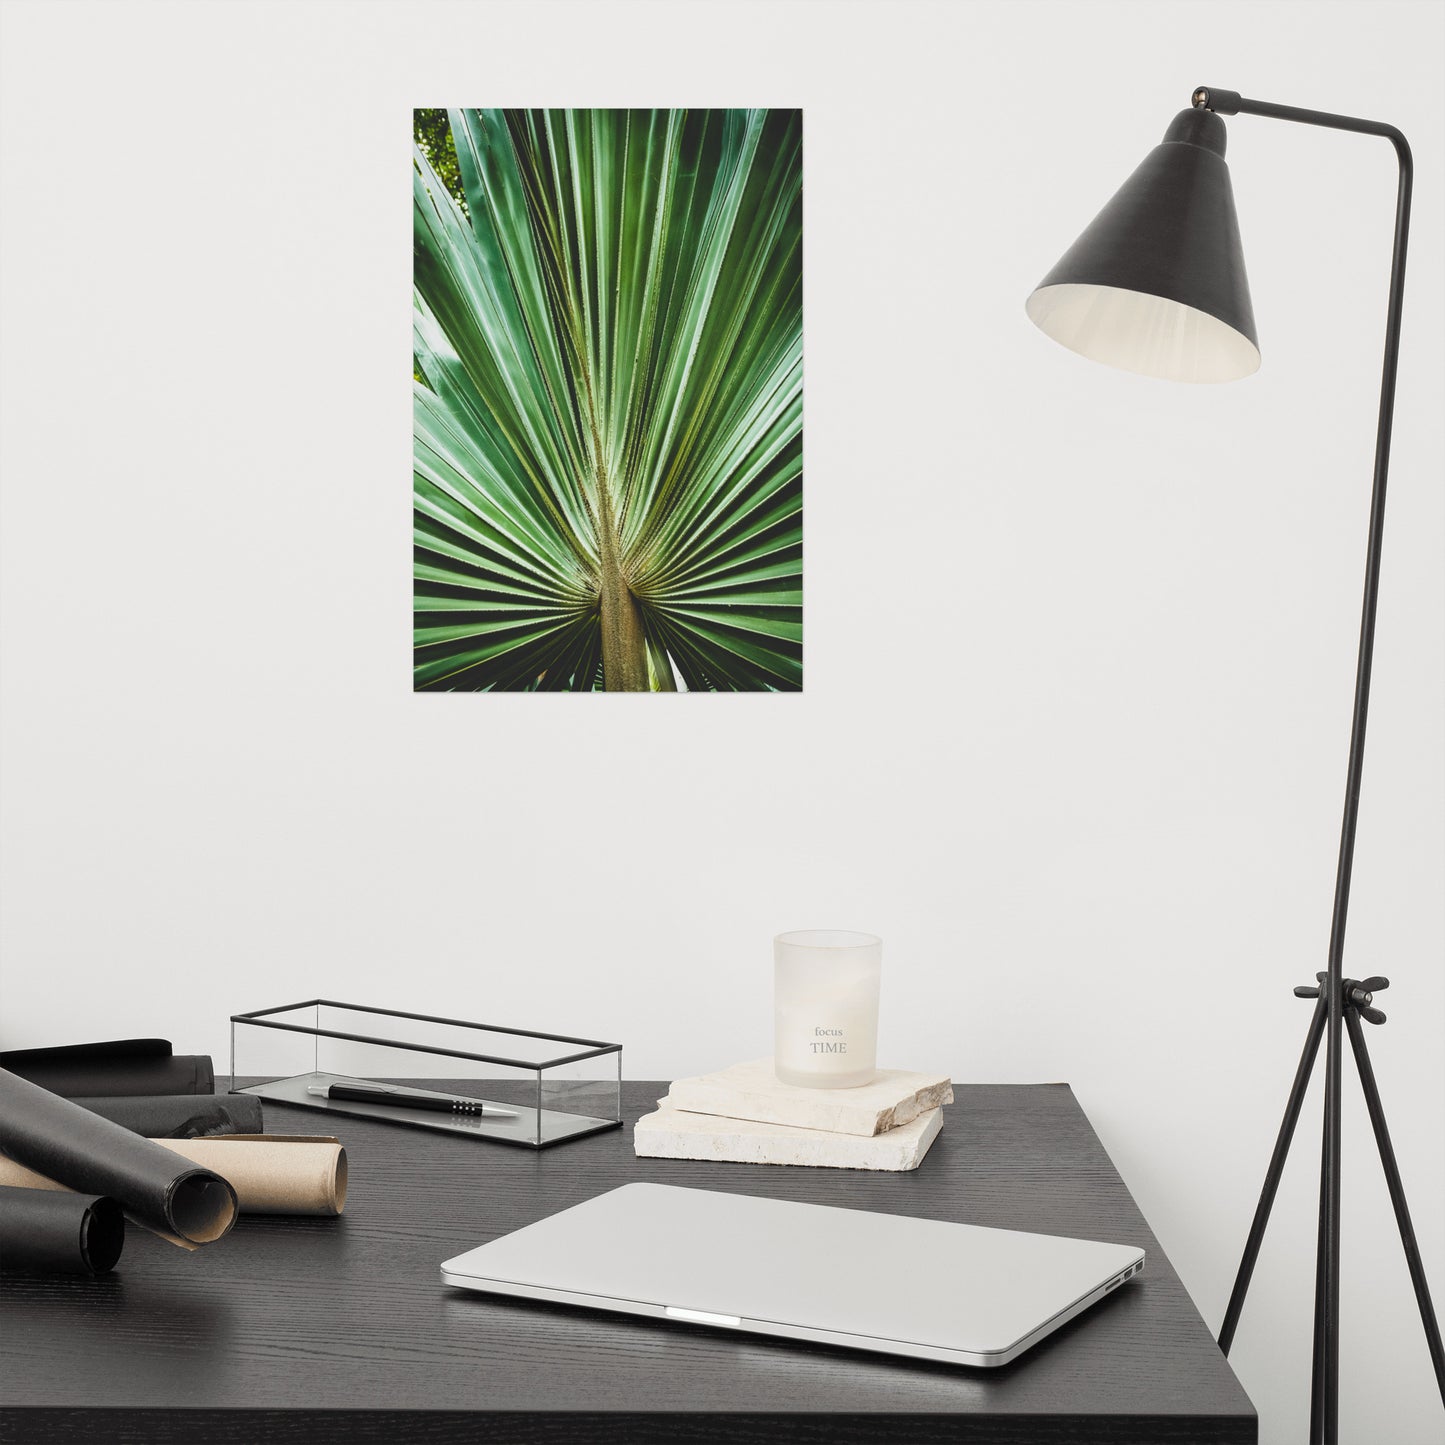 Medical Office Wall Decor: Aged and Colorized Wide Palm Leaves 2 - Botanical / Plants / Nature Photograph Loose / Unframed Wall Art Print - Artwork